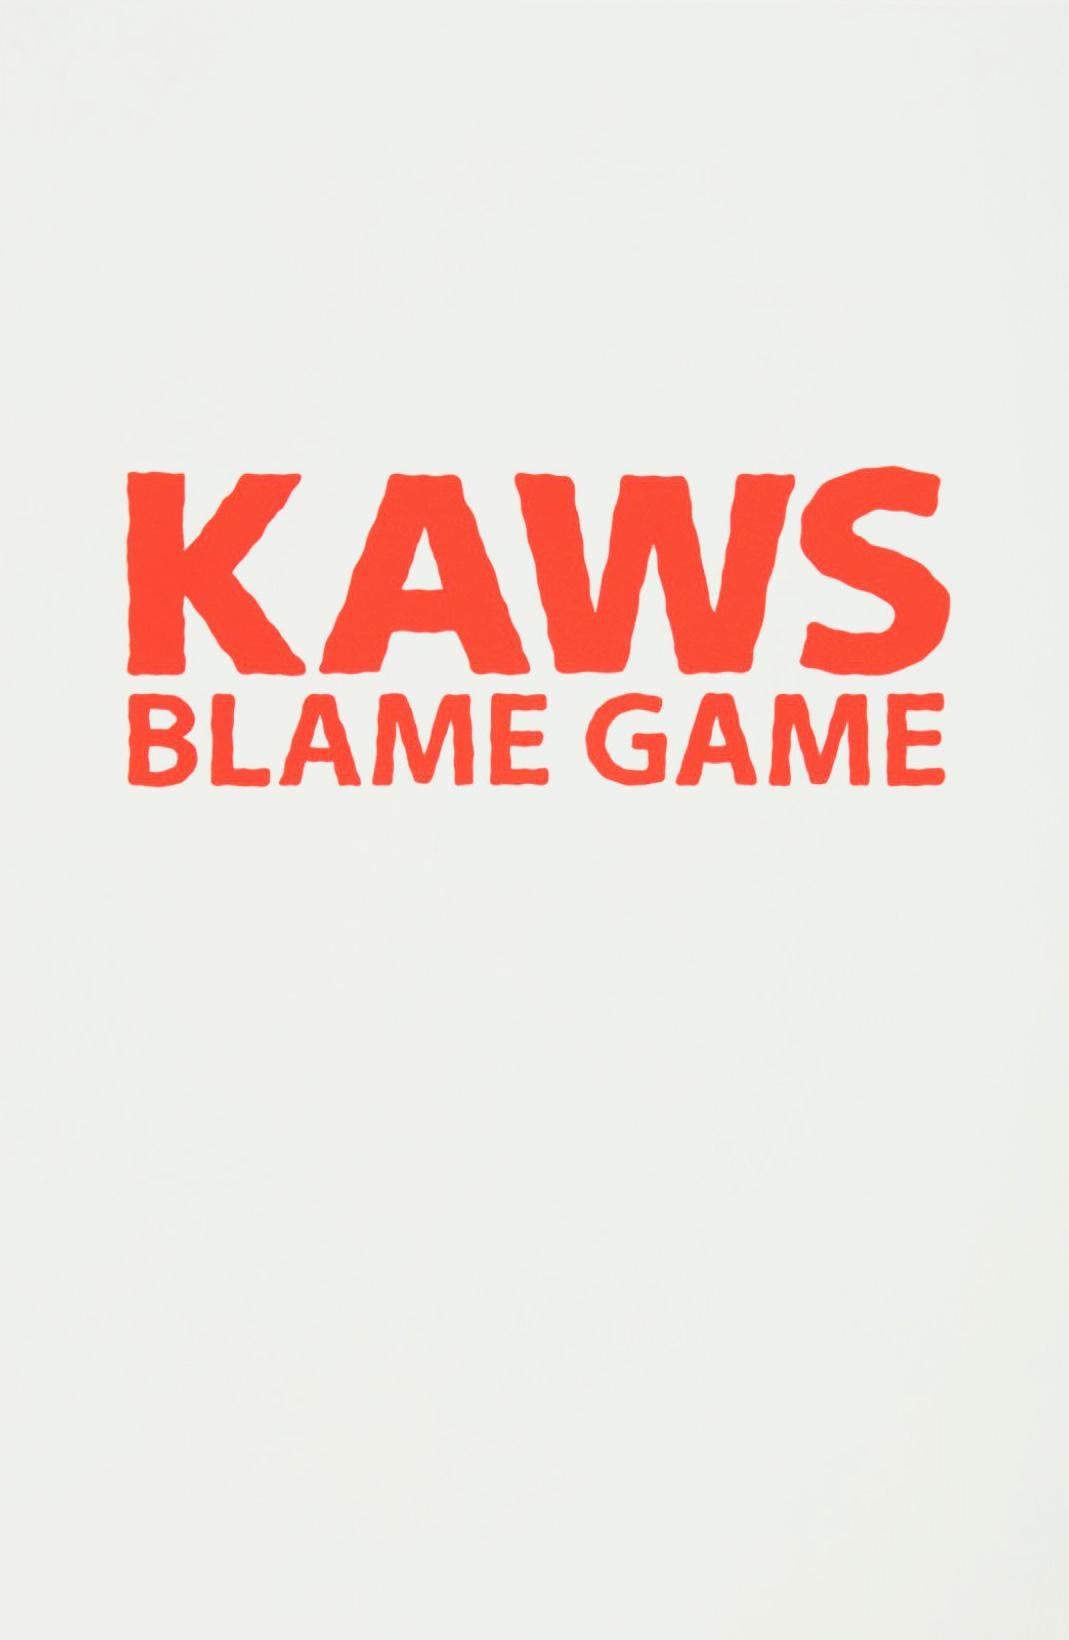 The ‘Blame Game' III by KAWS is an exceptionally rare silkscreen print, one of the ten in the portfolio series created in 2014. A completely new, individual, brightly colored screenprint signed and numbered by the artist. The portfolio was created